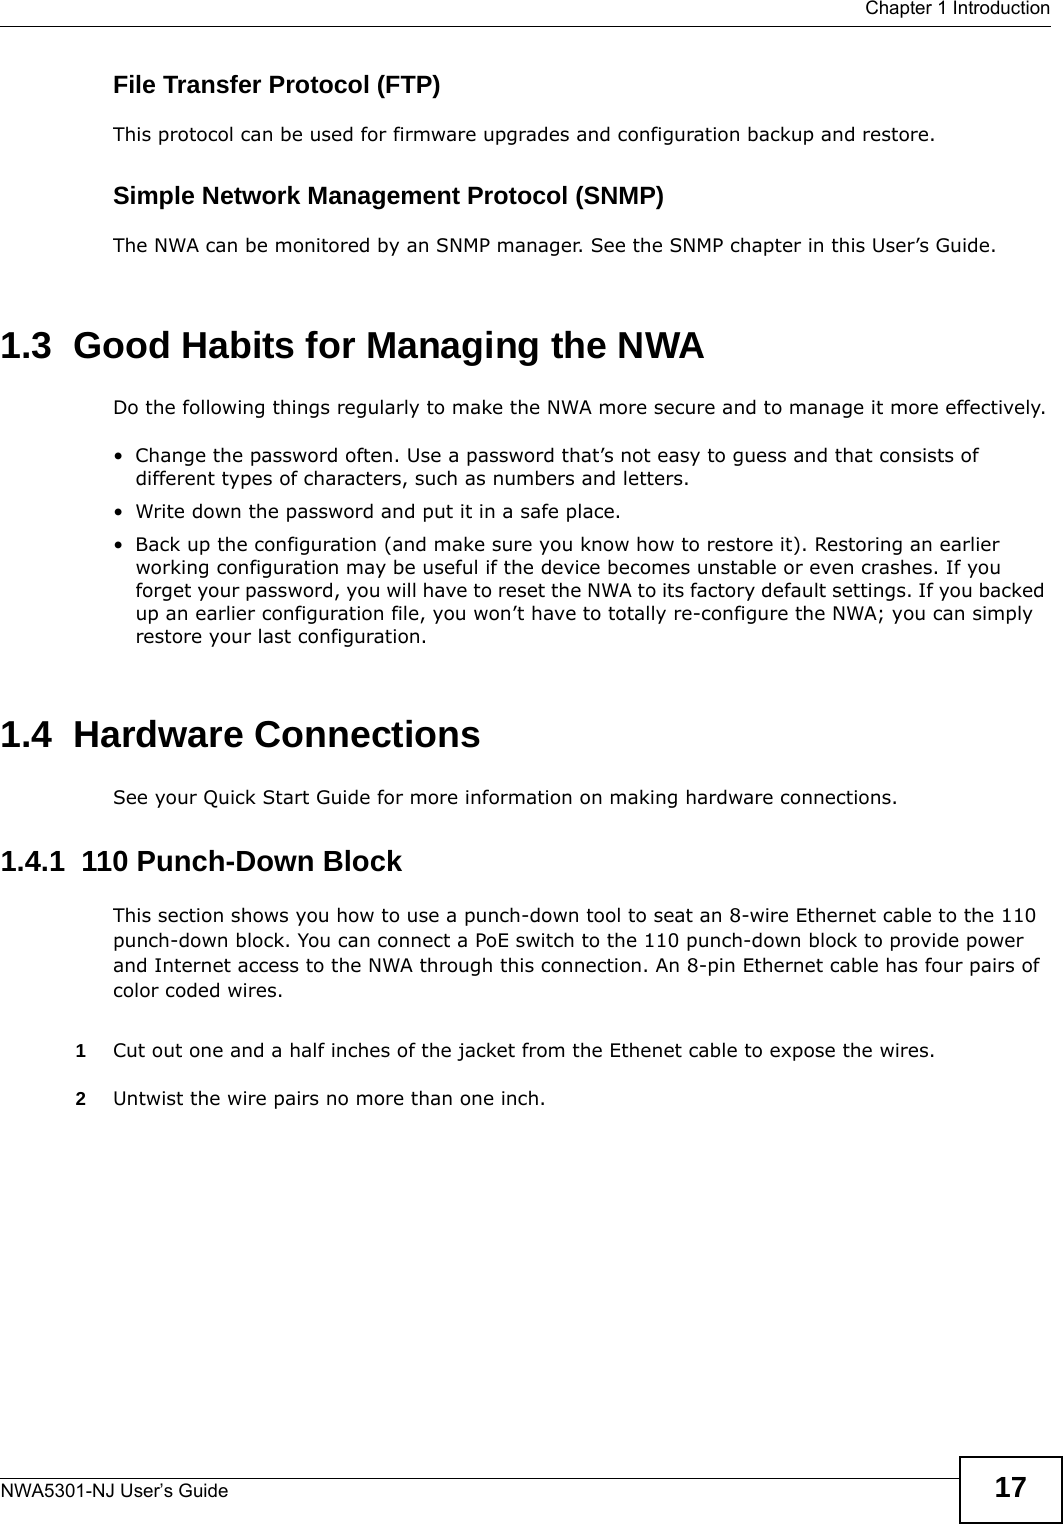  Chapter 1 IntroductionNWA5301-NJ User’s Guide 17File Transfer Protocol (FTP)This protocol can be used for firmware upgrades and configuration backup and restore.Simple Network Management Protocol (SNMP)The NWA can be monitored by an SNMP manager. See the SNMP chapter in this User’s Guide.1.3  Good Habits for Managing the NWADo the following things regularly to make the NWA more secure and to manage it more effectively.• Change the password often. Use a password that’s not easy to guess and that consists of different types of characters, such as numbers and letters.• Write down the password and put it in a safe place.• Back up the configuration (and make sure you know how to restore it). Restoring an earlier working configuration may be useful if the device becomes unstable or even crashes. If you forget your password, you will have to reset the NWA to its factory default settings. If you backed up an earlier configuration file, you won’t have to totally re-configure the NWA; you can simply restore your last configuration.1.4  Hardware ConnectionsSee your Quick Start Guide for more information on making hardware connections.1.4.1  110 Punch-Down BlockThis section shows you how to use a punch-down tool to seat an 8-wire Ethernet cable to the 110 punch-down block. You can connect a PoE switch to the 110 punch-down block to provide power and Internet access to the NWA through this connection. An 8-pin Ethernet cable has four pairs of color coded wires.1Cut out one and a half inches of the jacket from the Ethenet cable to expose the wires. 2Untwist the wire pairs no more than one inch.